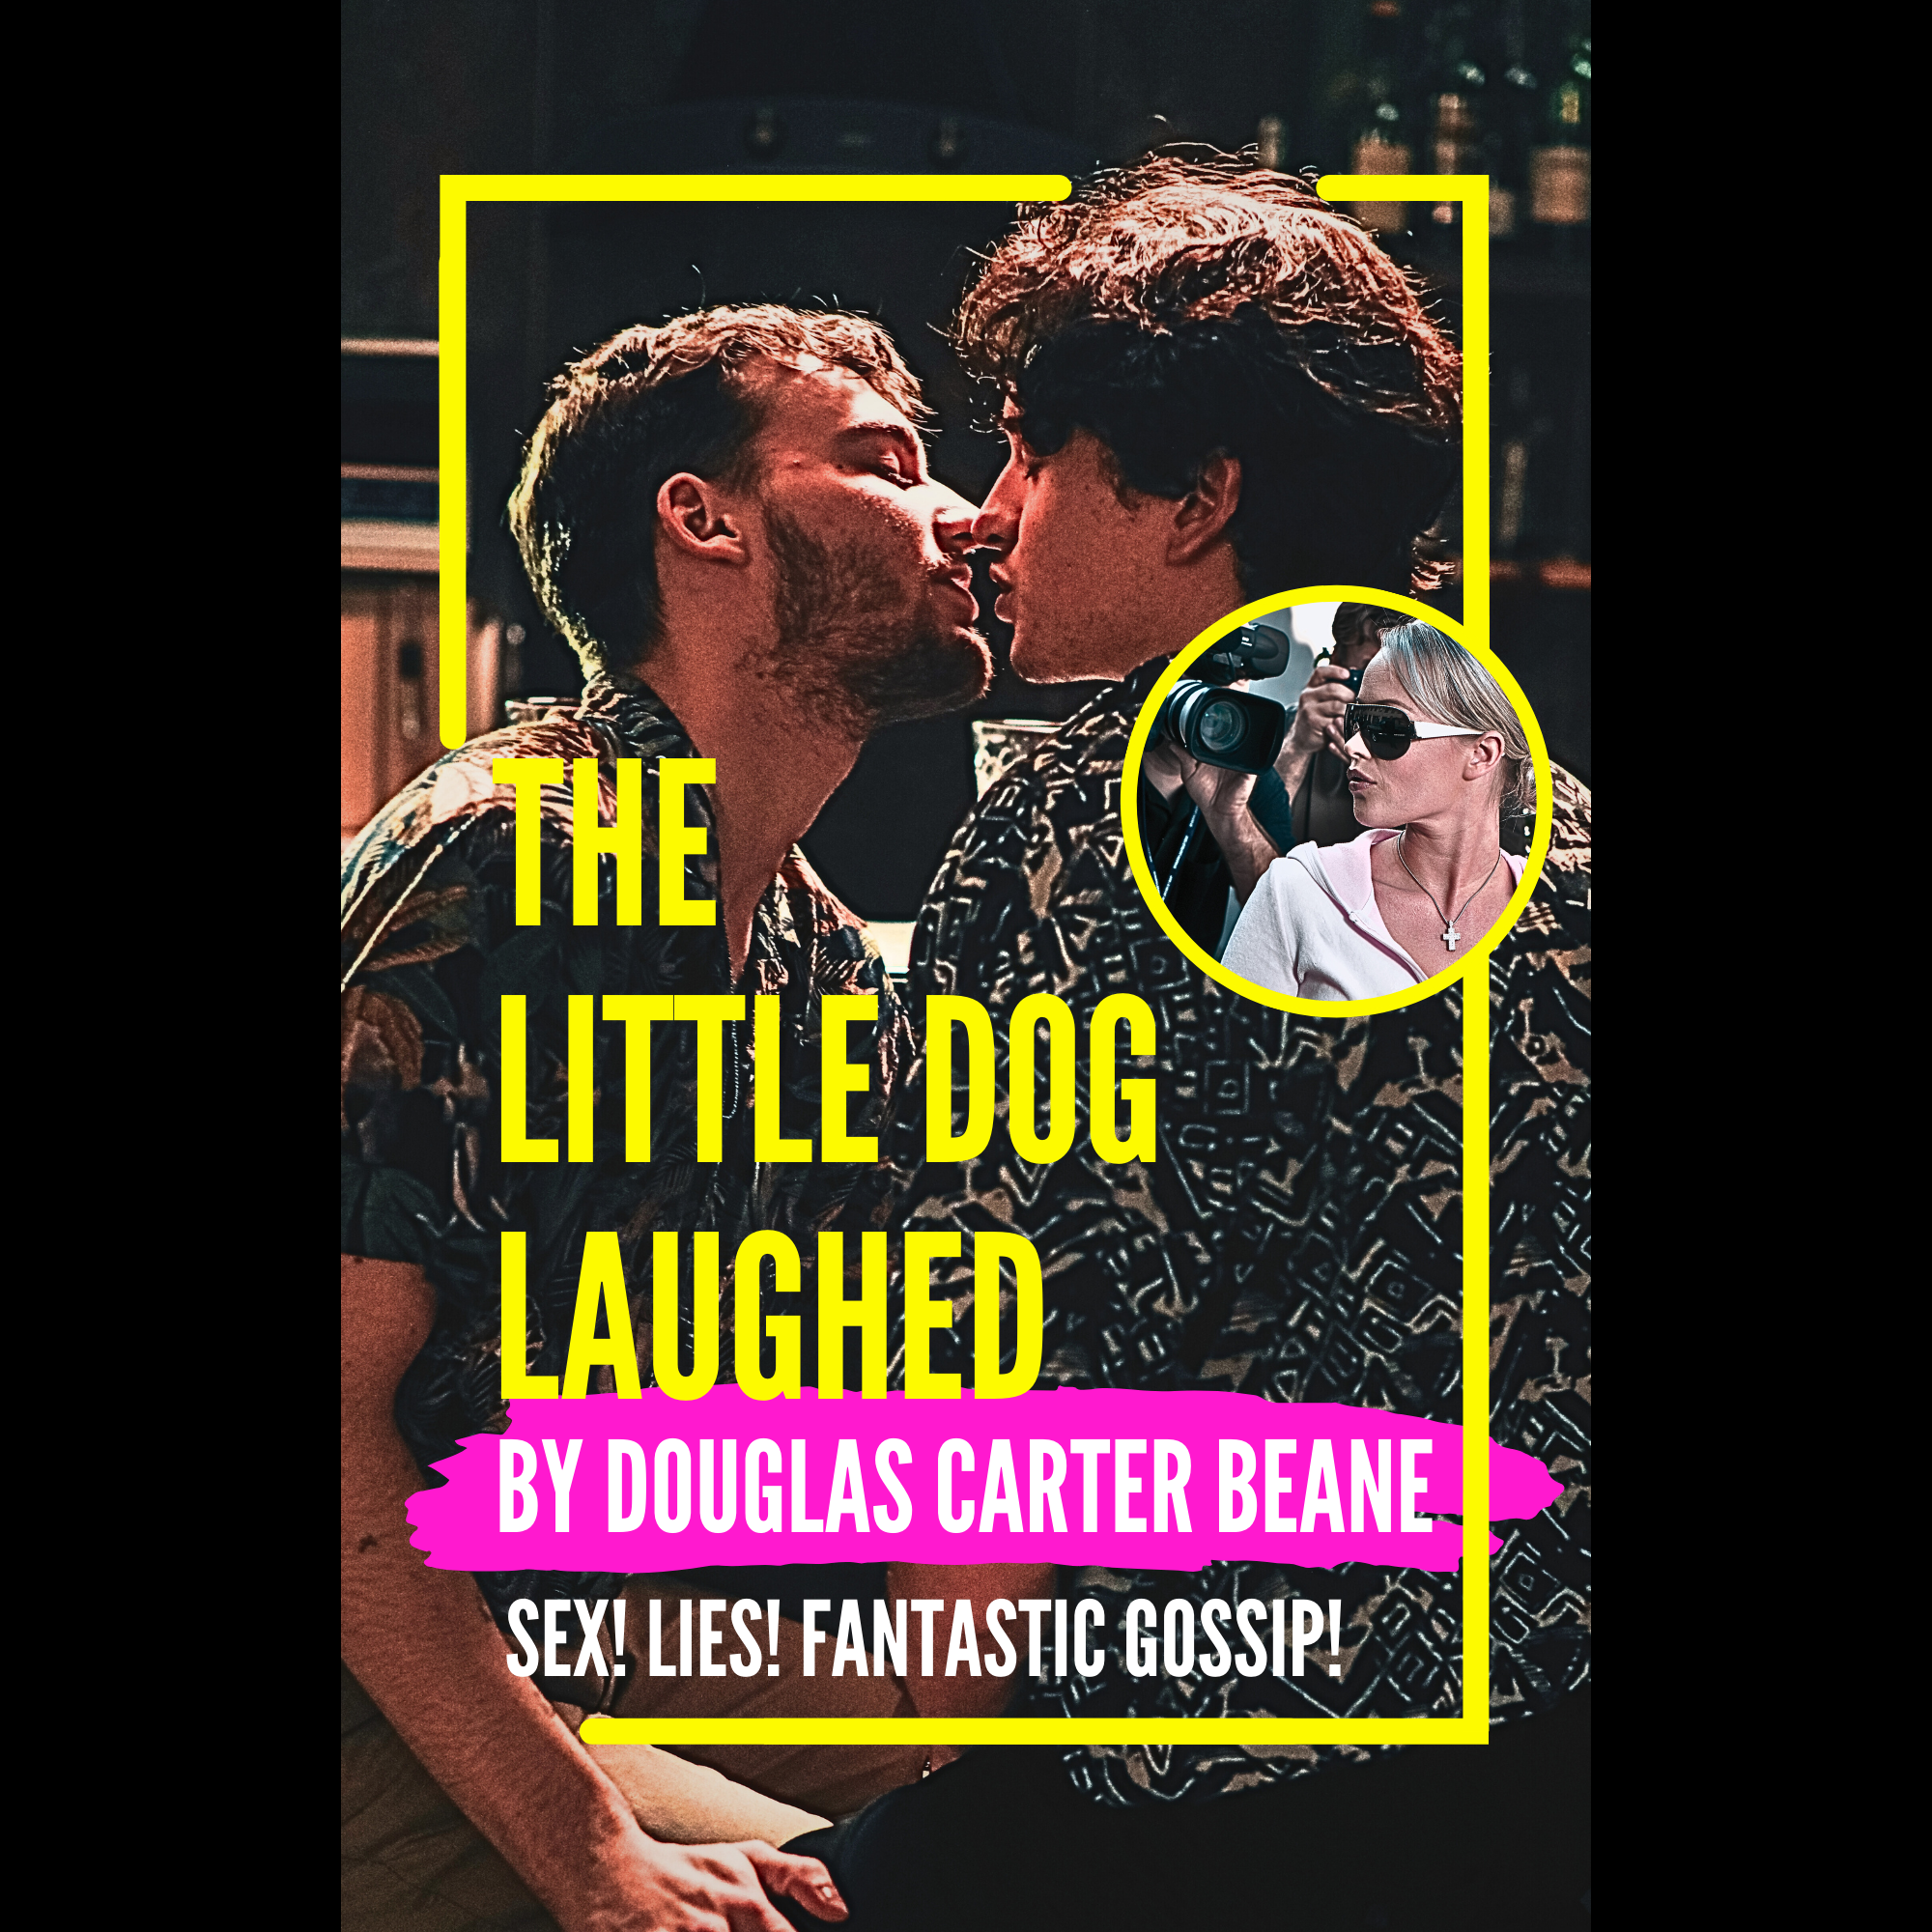 The Little Dog Laughed poster